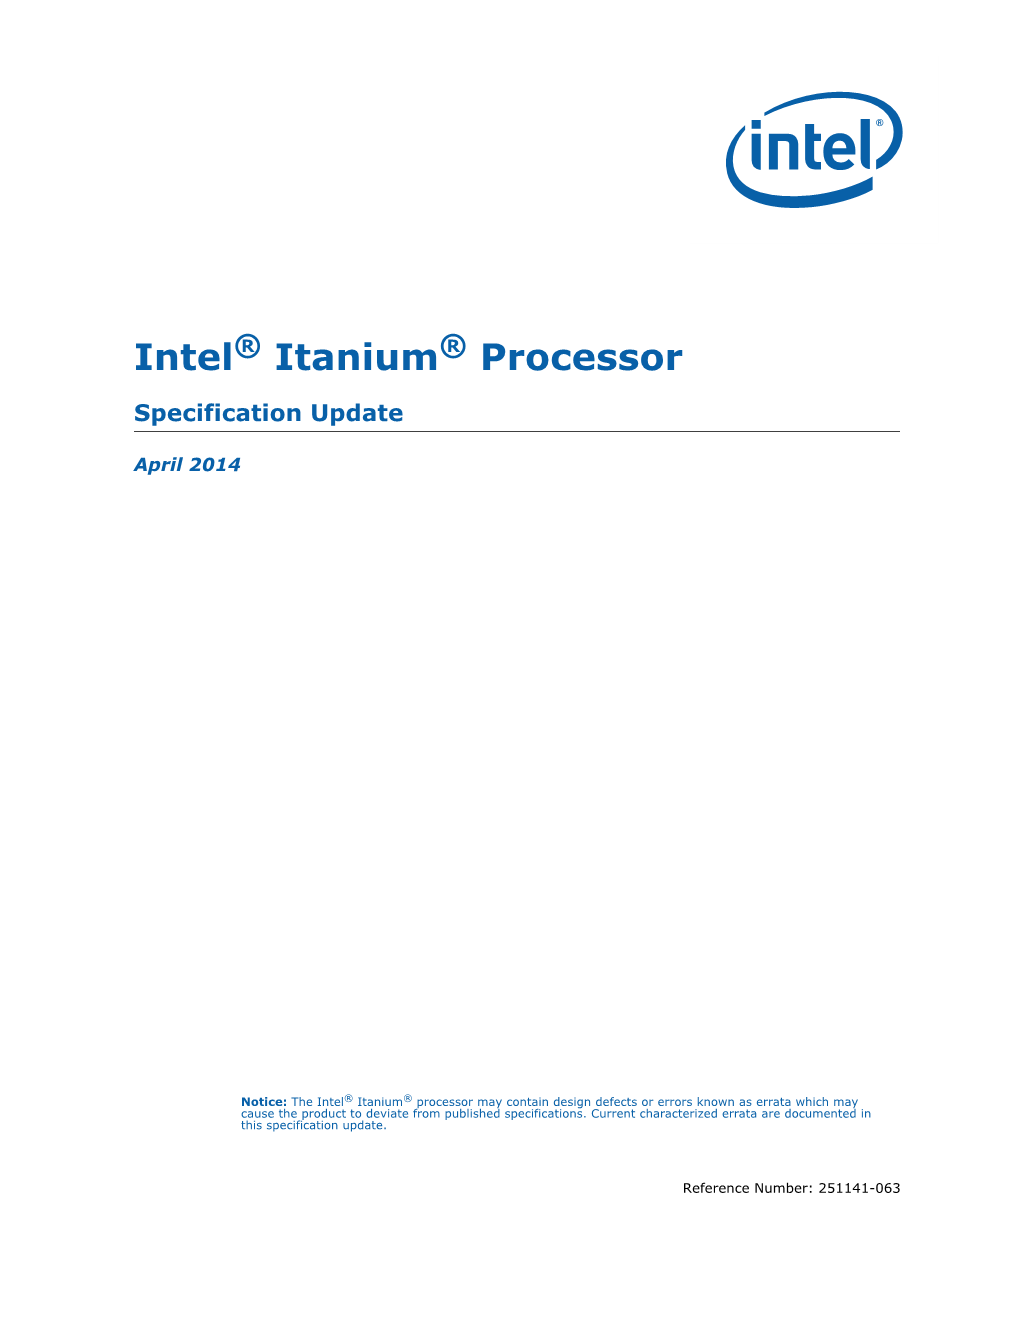 Intel® Itanium® Processor Specification Update 5 Specification Update April 2014 Revision History